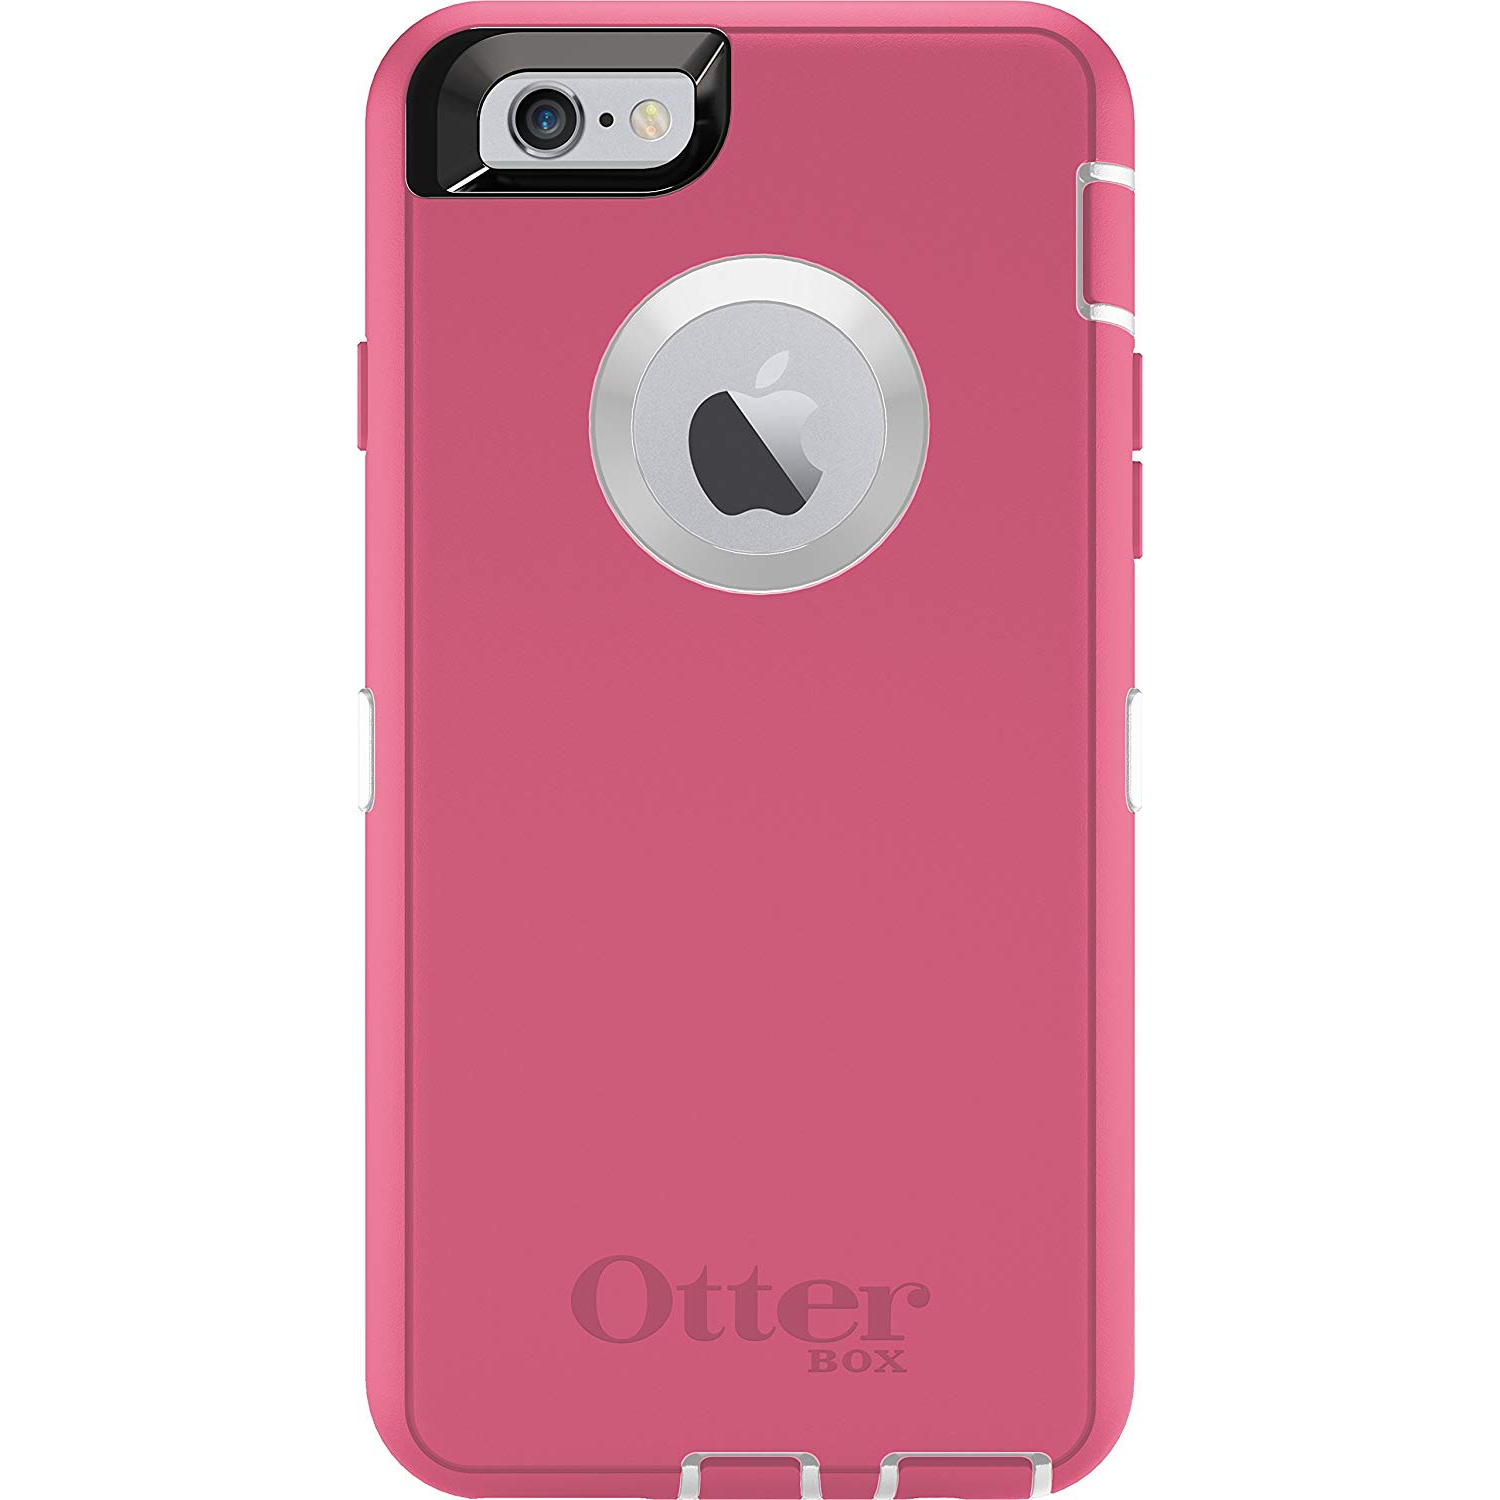 OtterBox Defender Series iPhone 6 Plus Only Case (5.5" Version), Retail Packaging, Neon Rose (Whisper White/Blaze Pink)